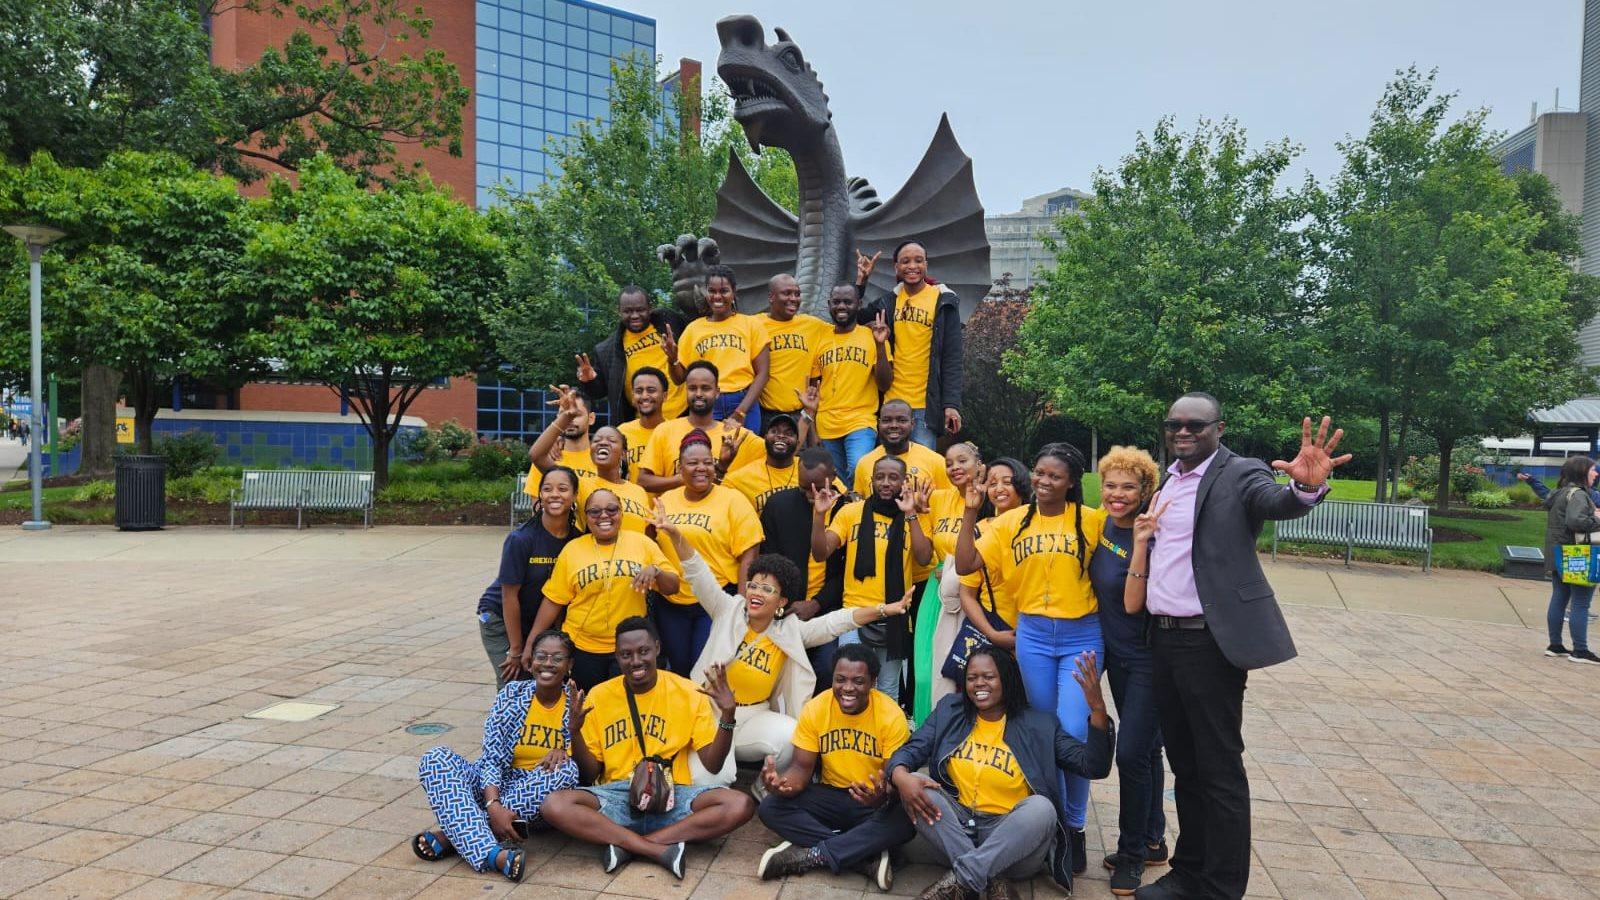 A group of people wearing yellow Drexel shirts crowd around the Mario statue on Drexel&#39;s campus.